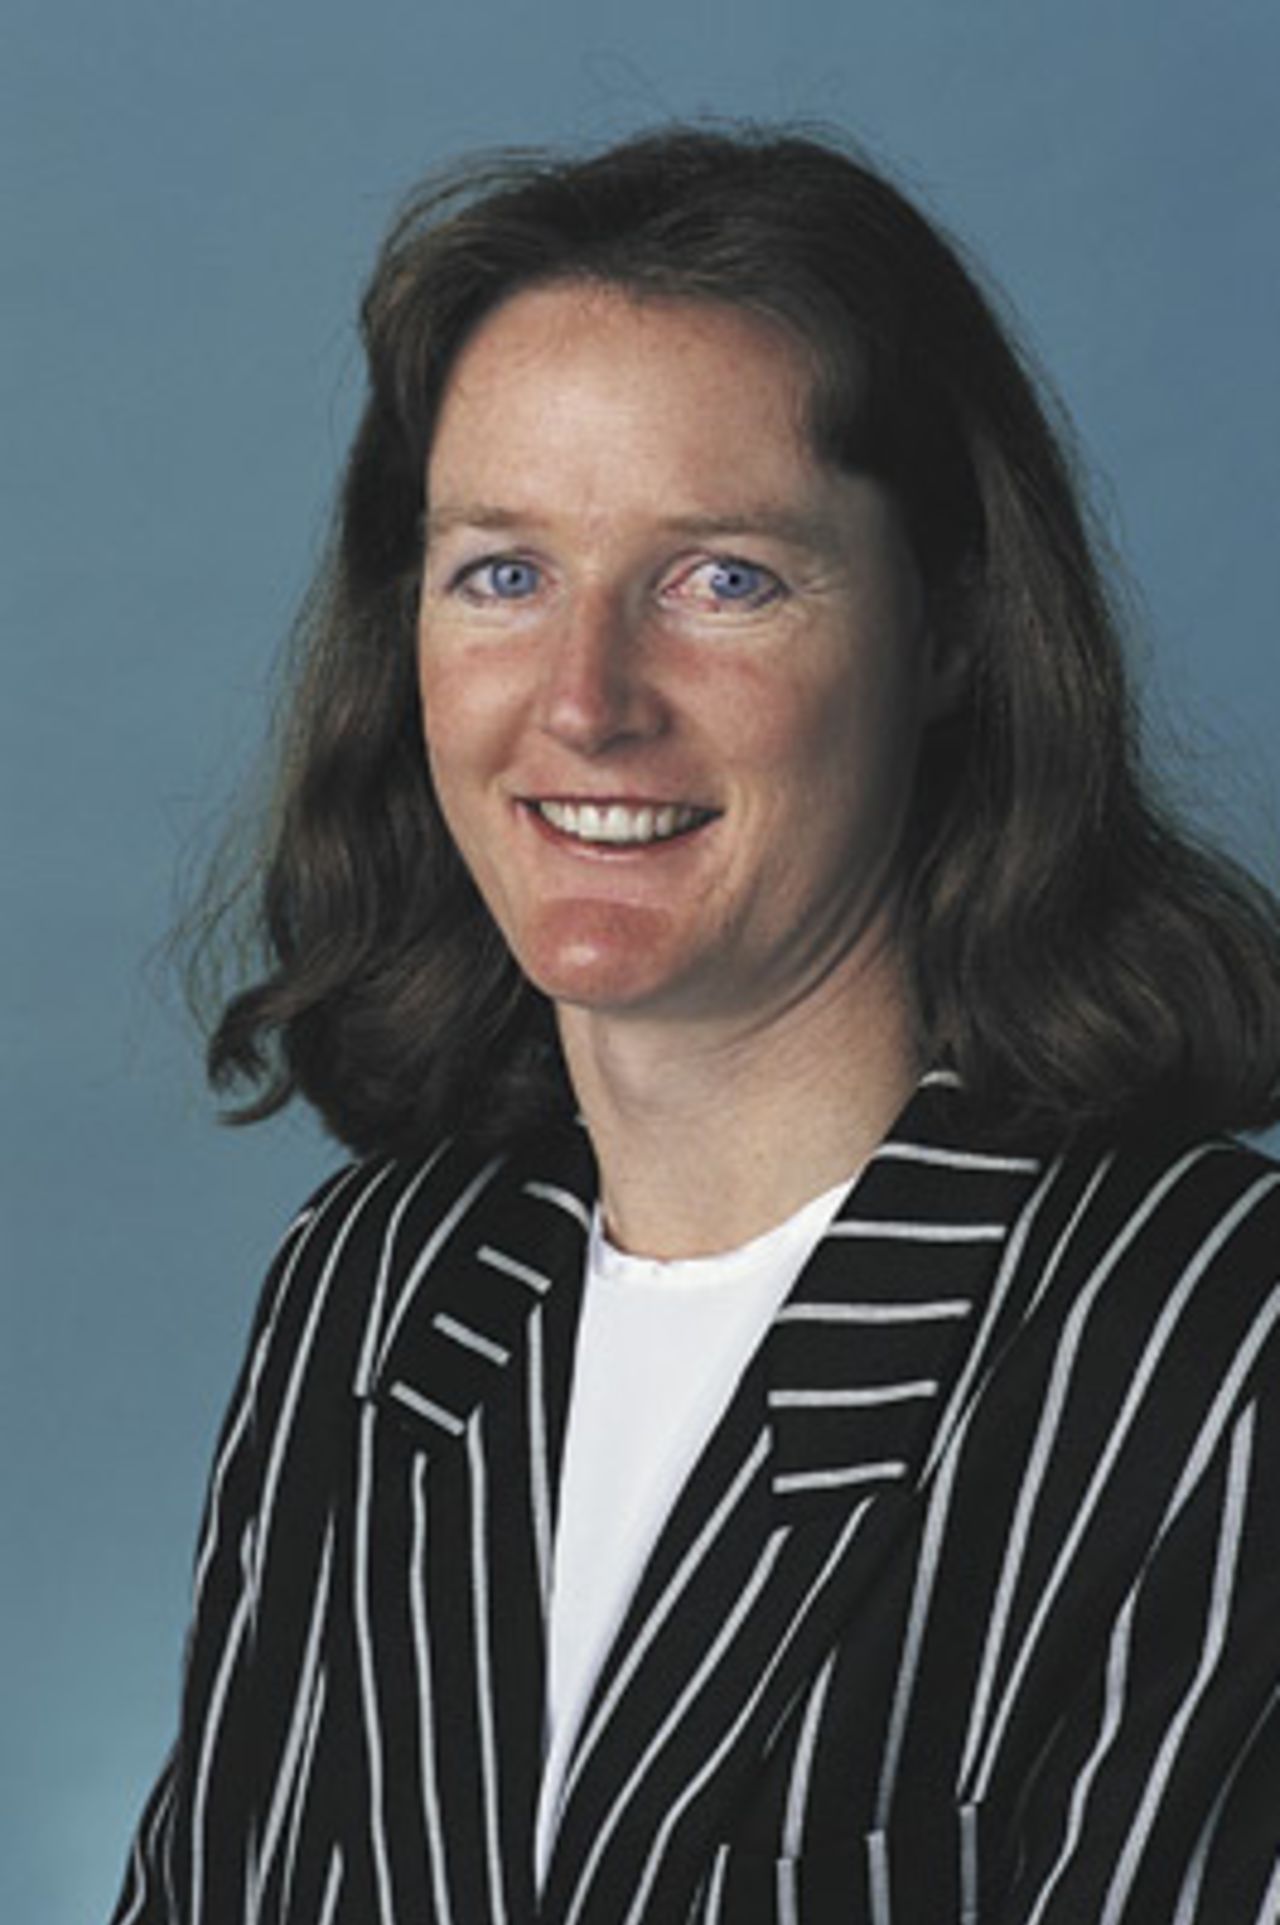 Portrait of Clare Nicholson, at Lincoln, July 2000 - New Zealand training squad member for the CricInfo Women's World Cup 2000